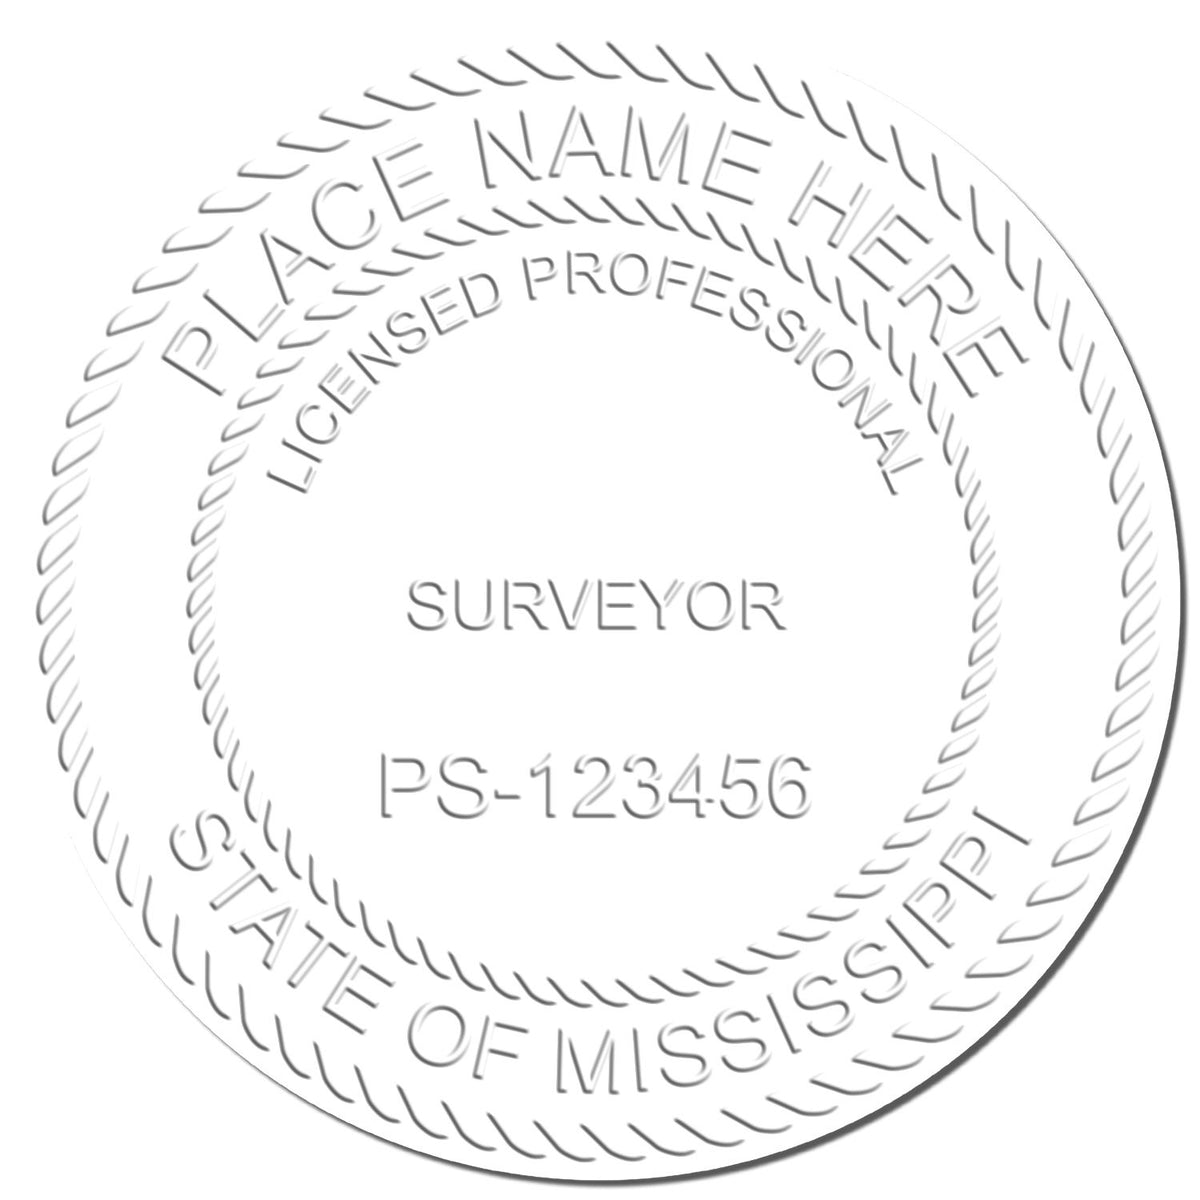 This paper is stamped with a sample imprint of the Gift Mississippi Land Surveyor Seal, signifying its quality and reliability.